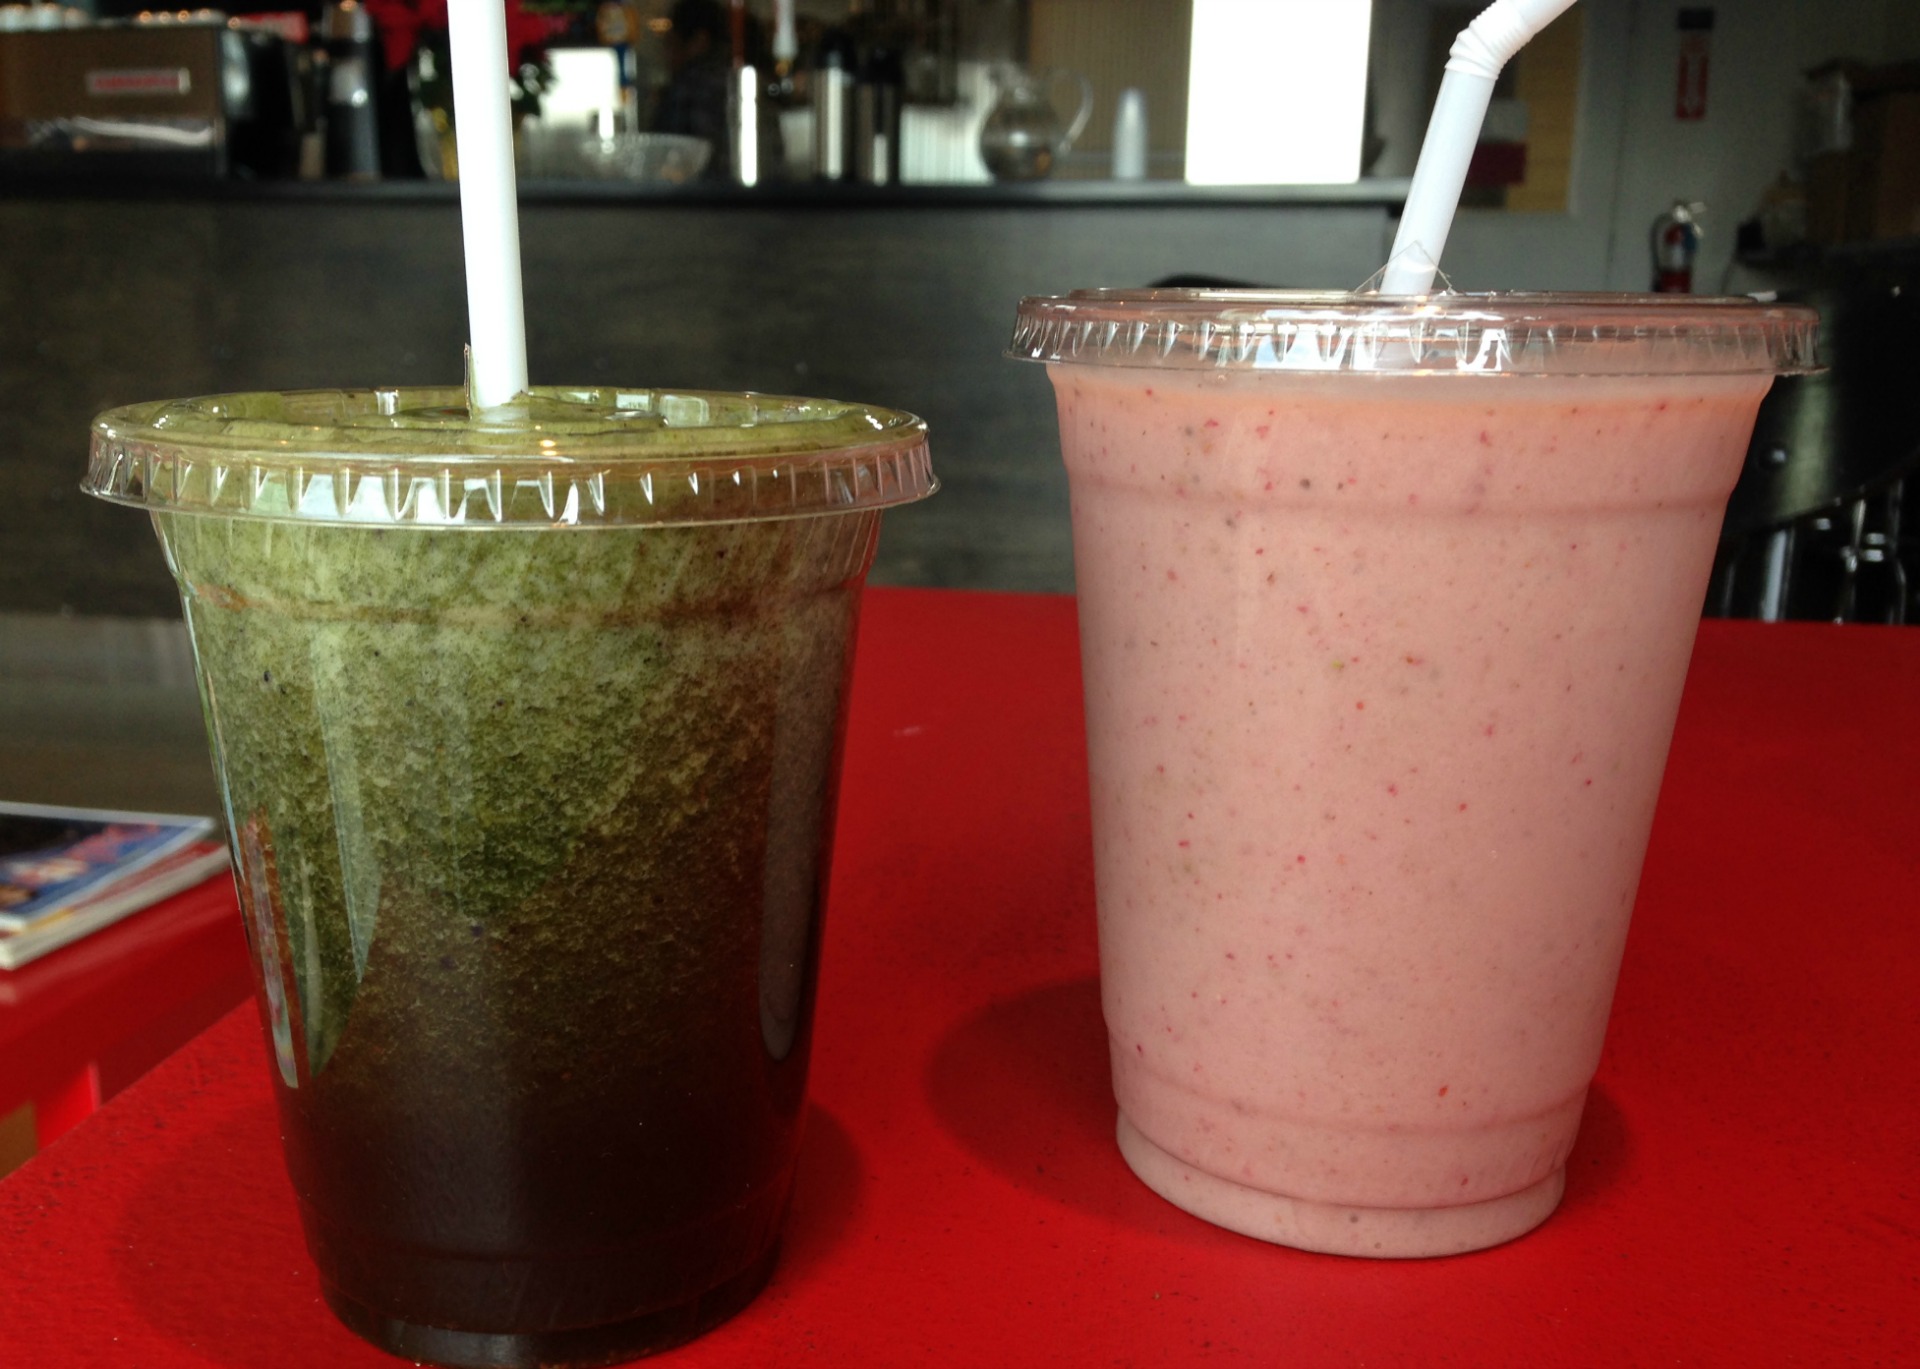 A Collagen Blues juice and Almond Strawberry Joy smoothie from Marana Cafe in Oakland